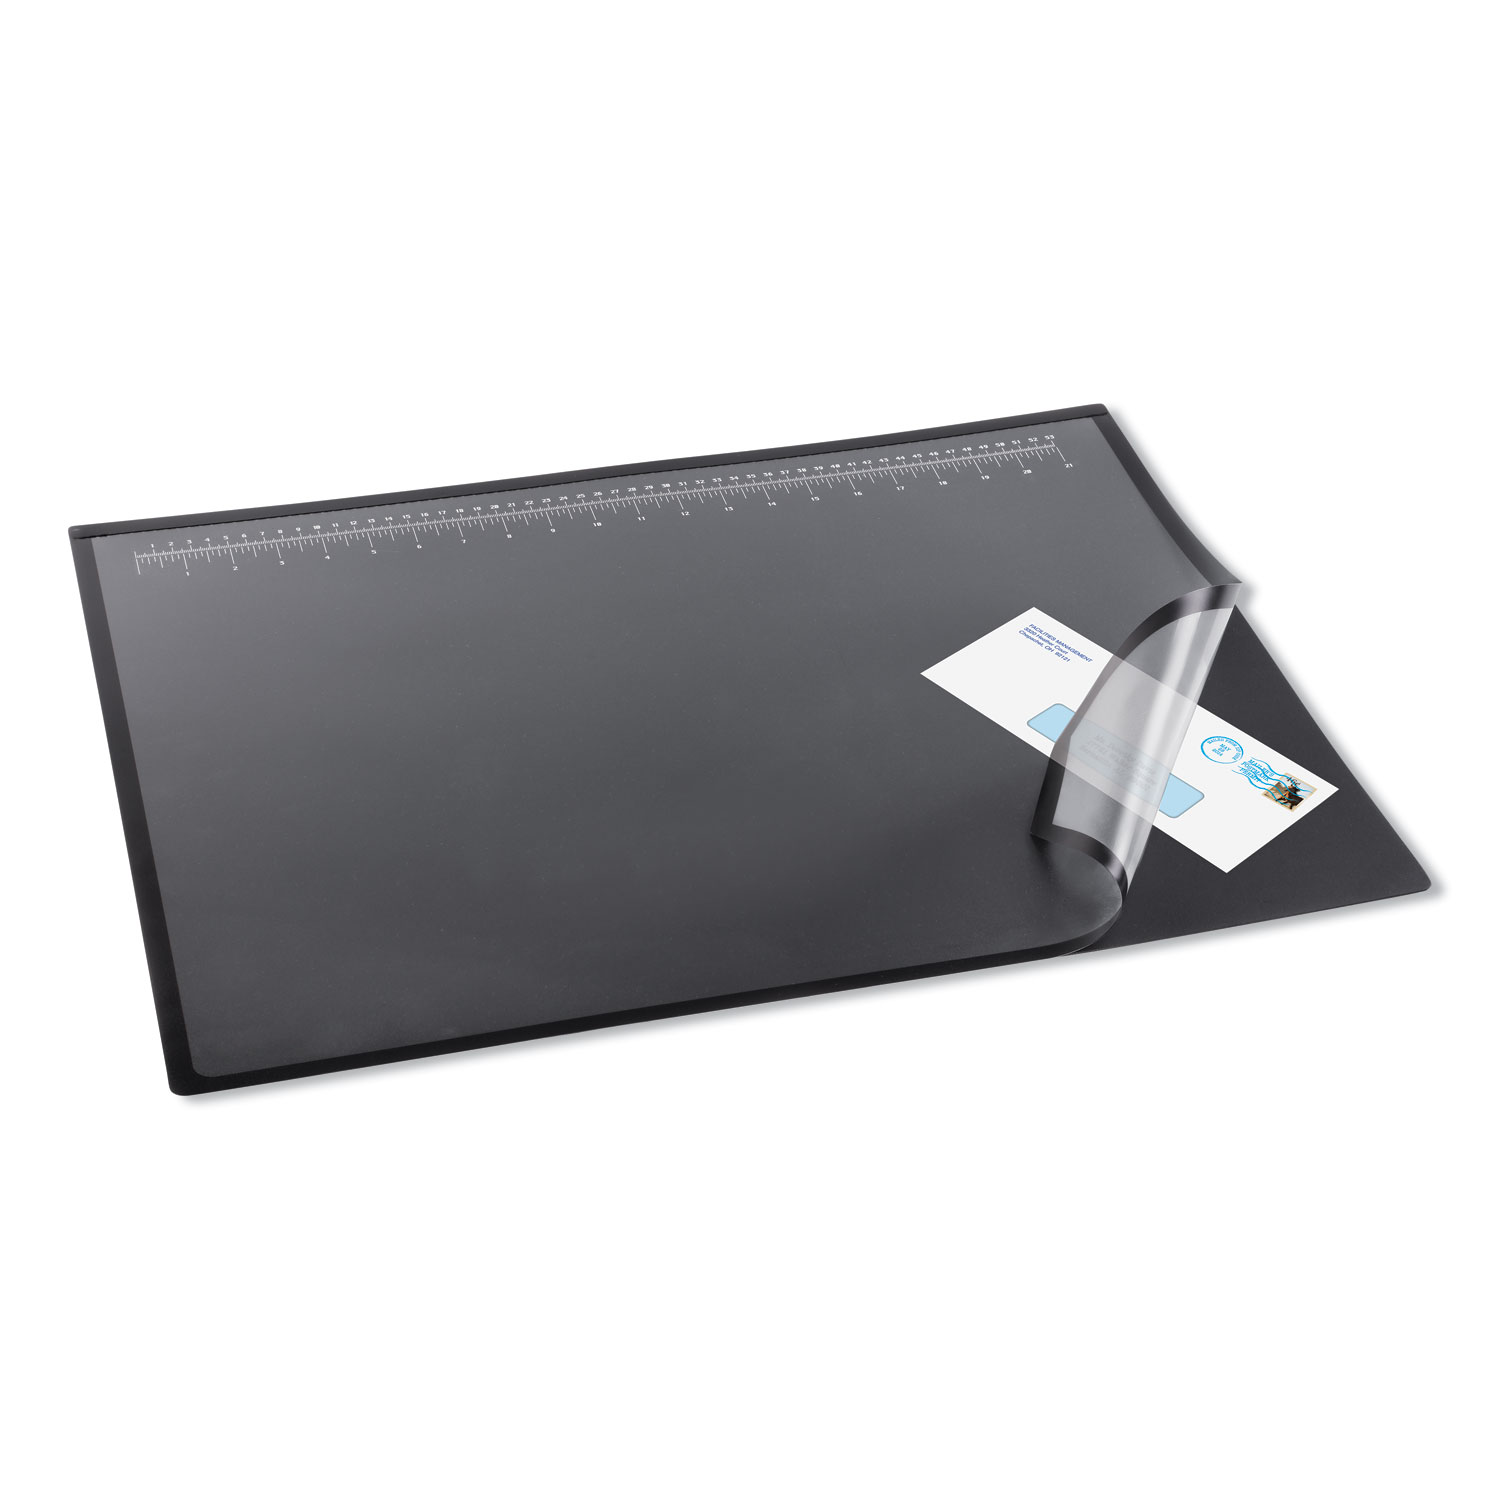 Lift-Top Pad Desktop Organizer with Clear Overlay, 22 x 17, Black